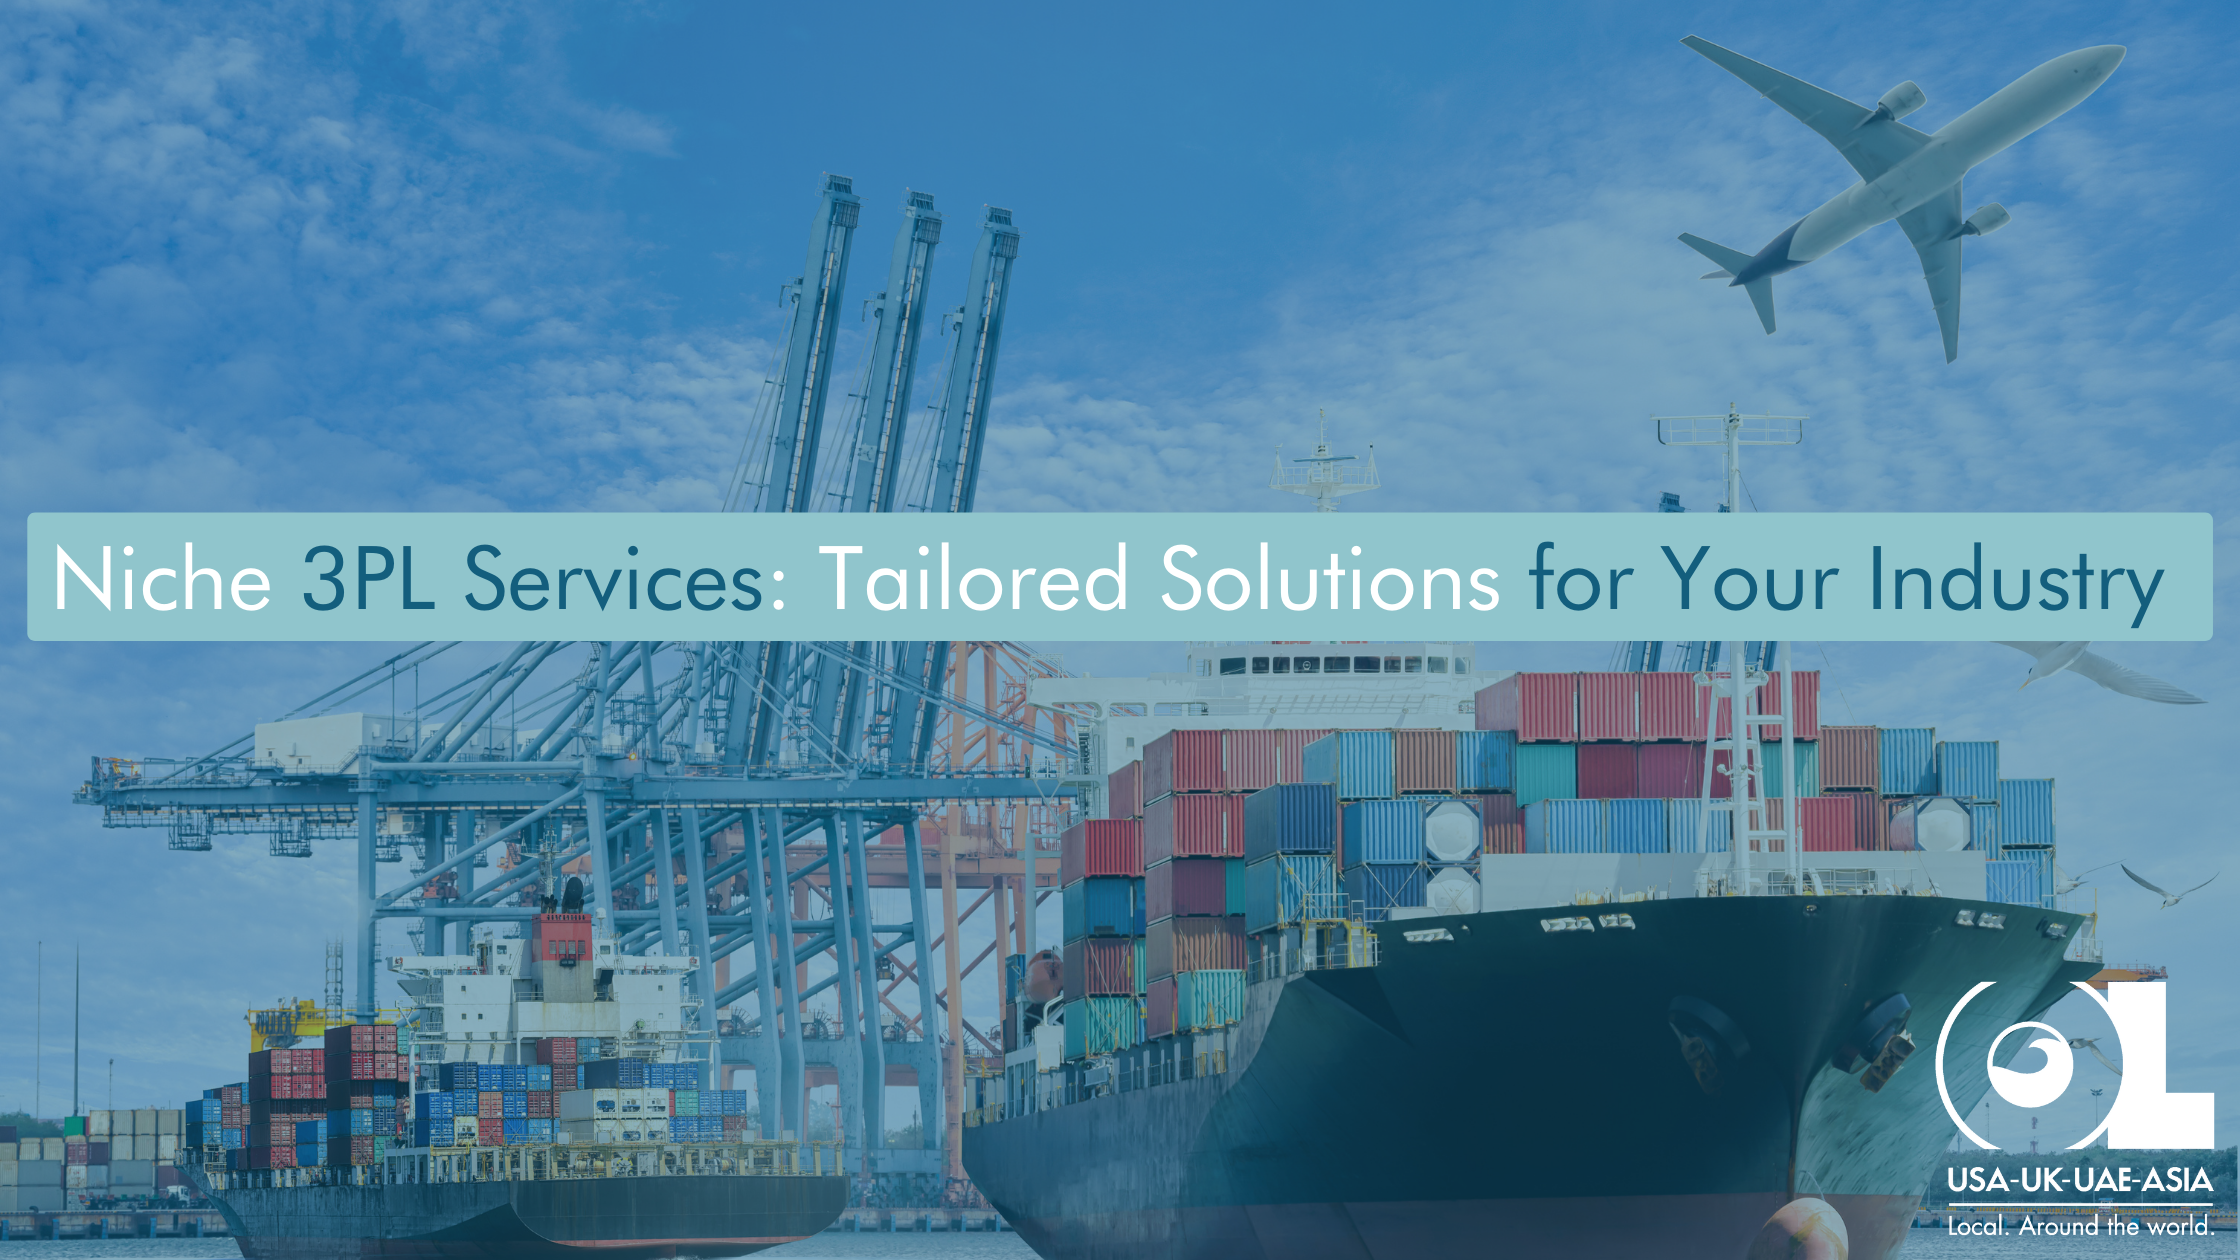 Niche-3PL-Services-Tailored-Solutions-for-Your-Industry-OL-USA